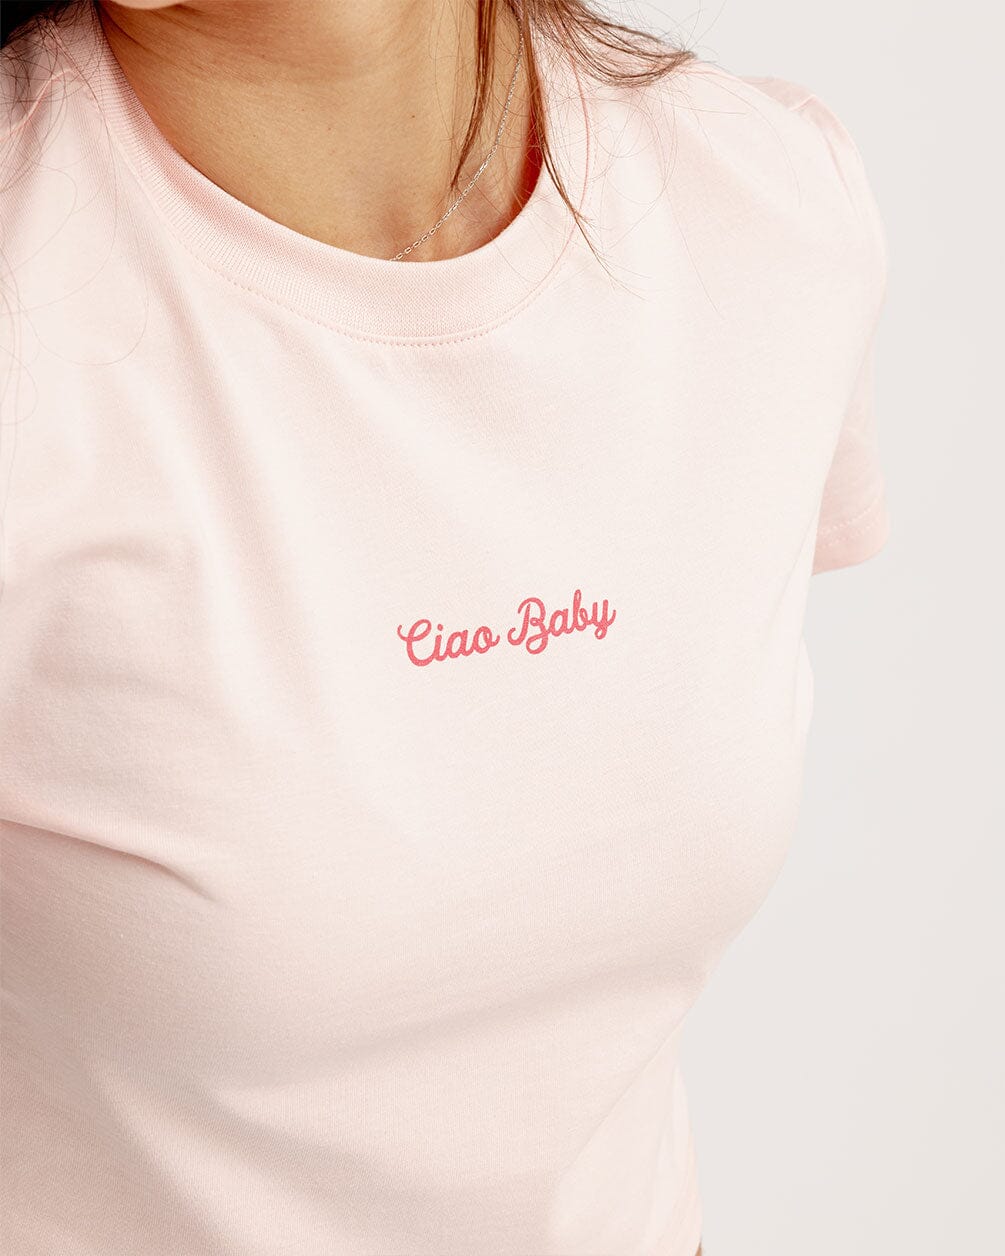 Ciao Baby Cropped Tee Cropped IN YOUR SHOE 